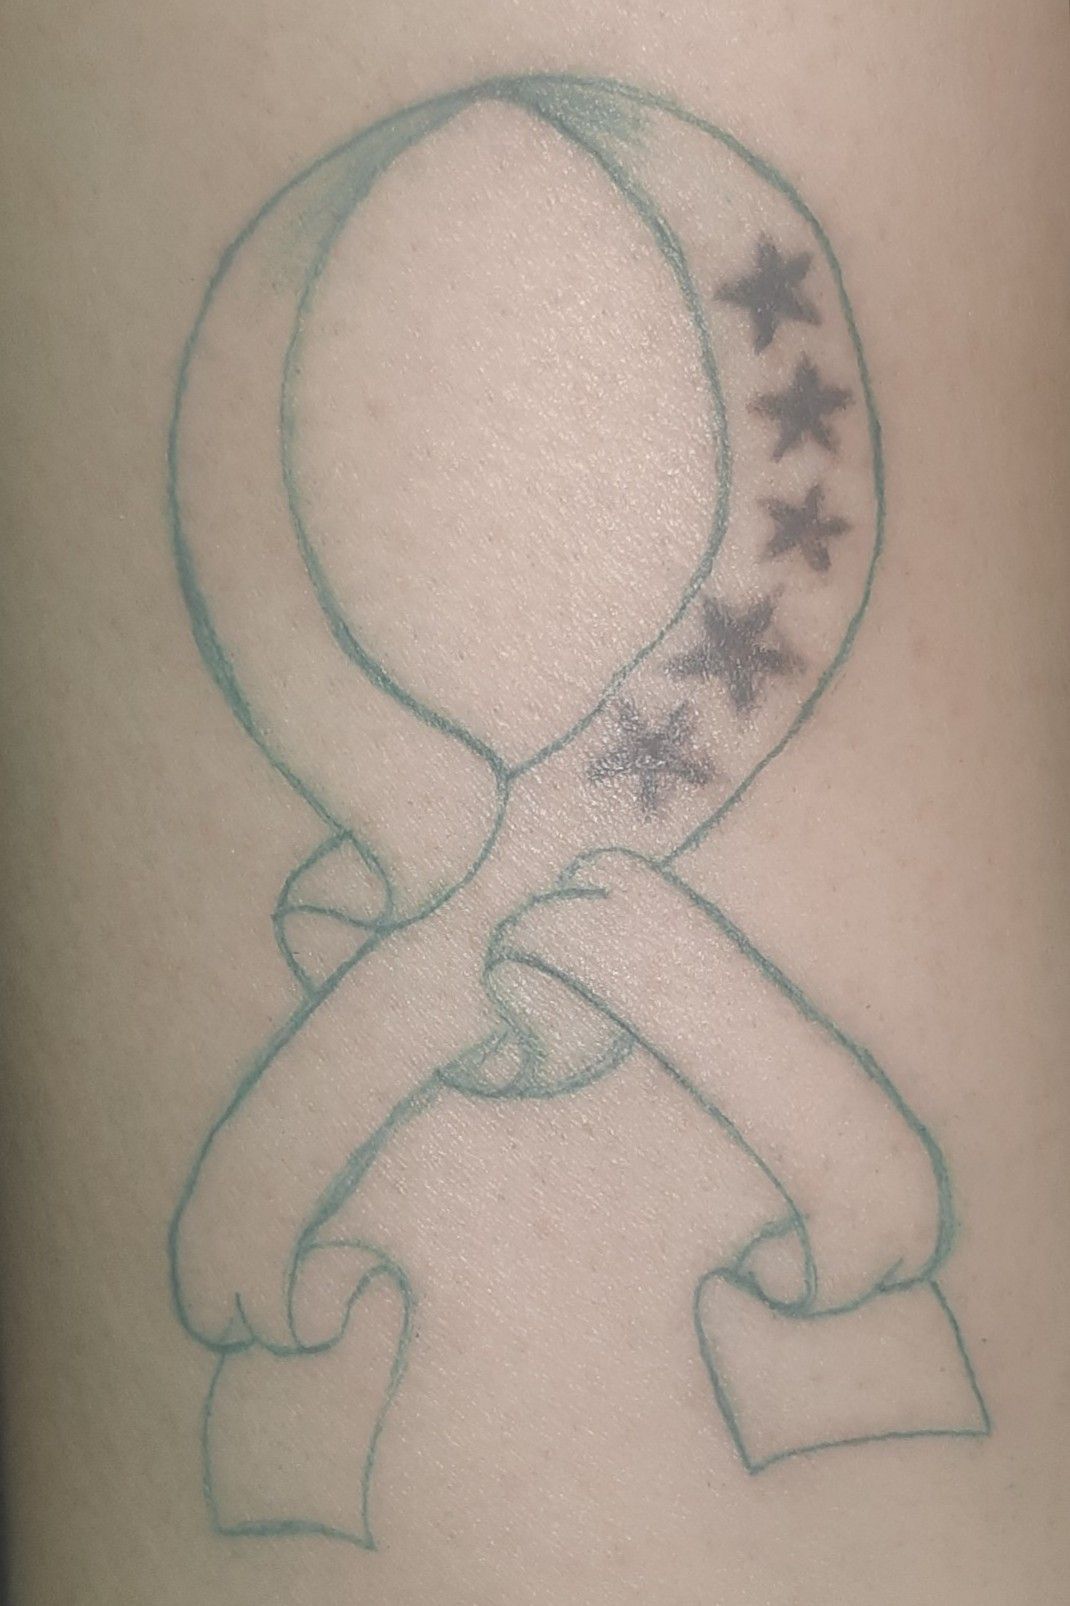 85 Beautiful Cancer Ribbon Tattoos And Their Meaning  AuthorityTattoo